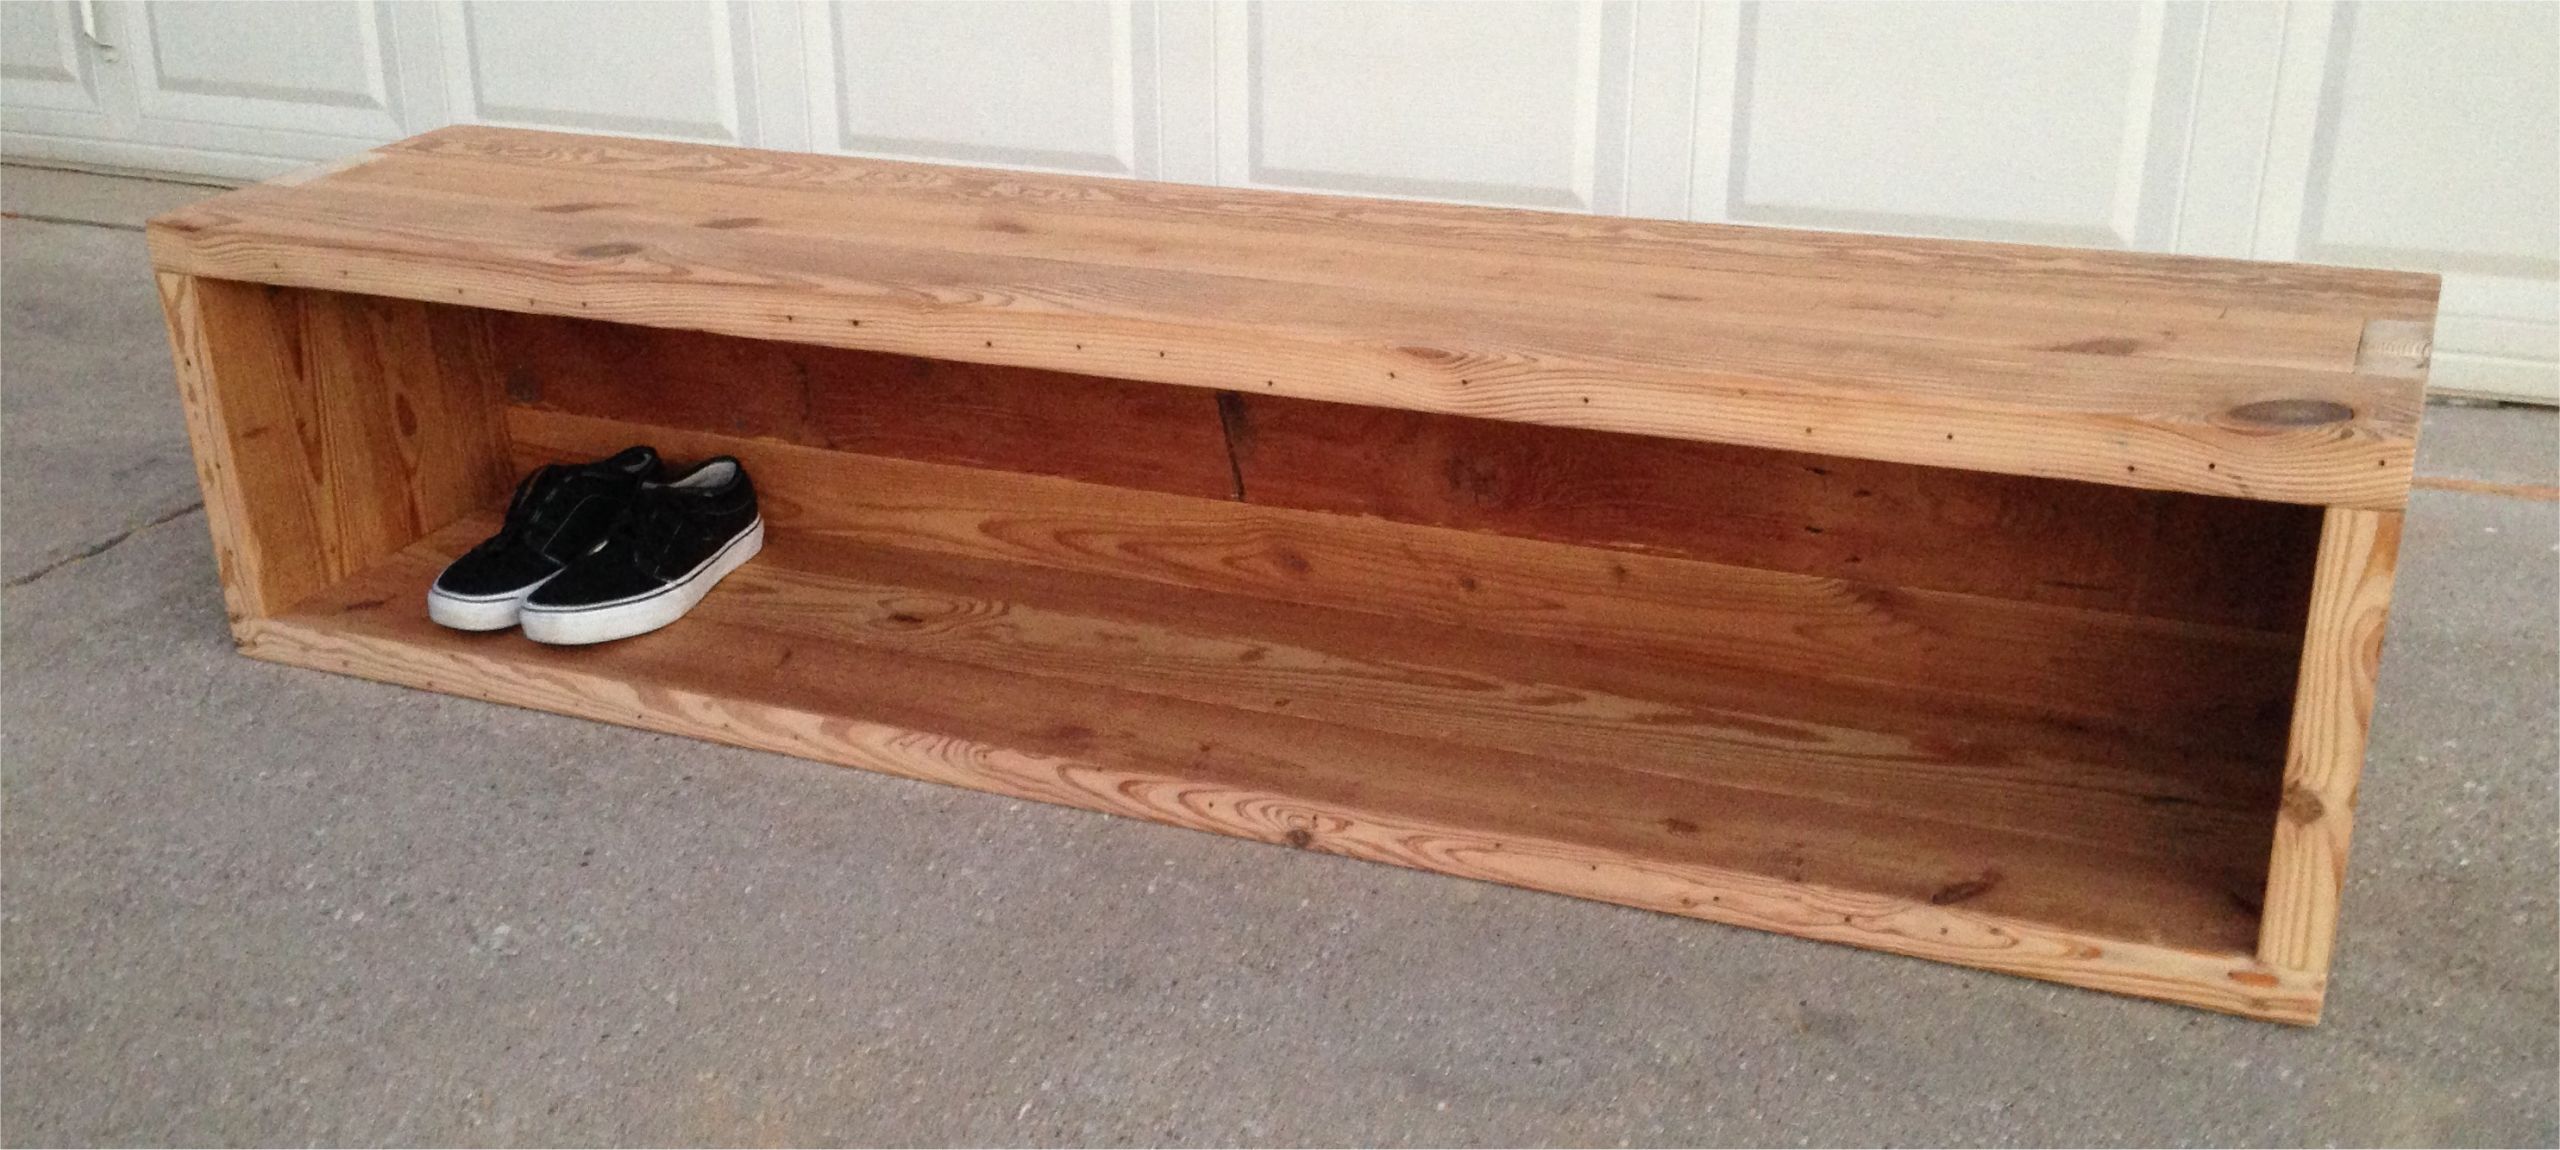 Reclaimed Wood Storage Bench
 Reclaimed Storage Bench